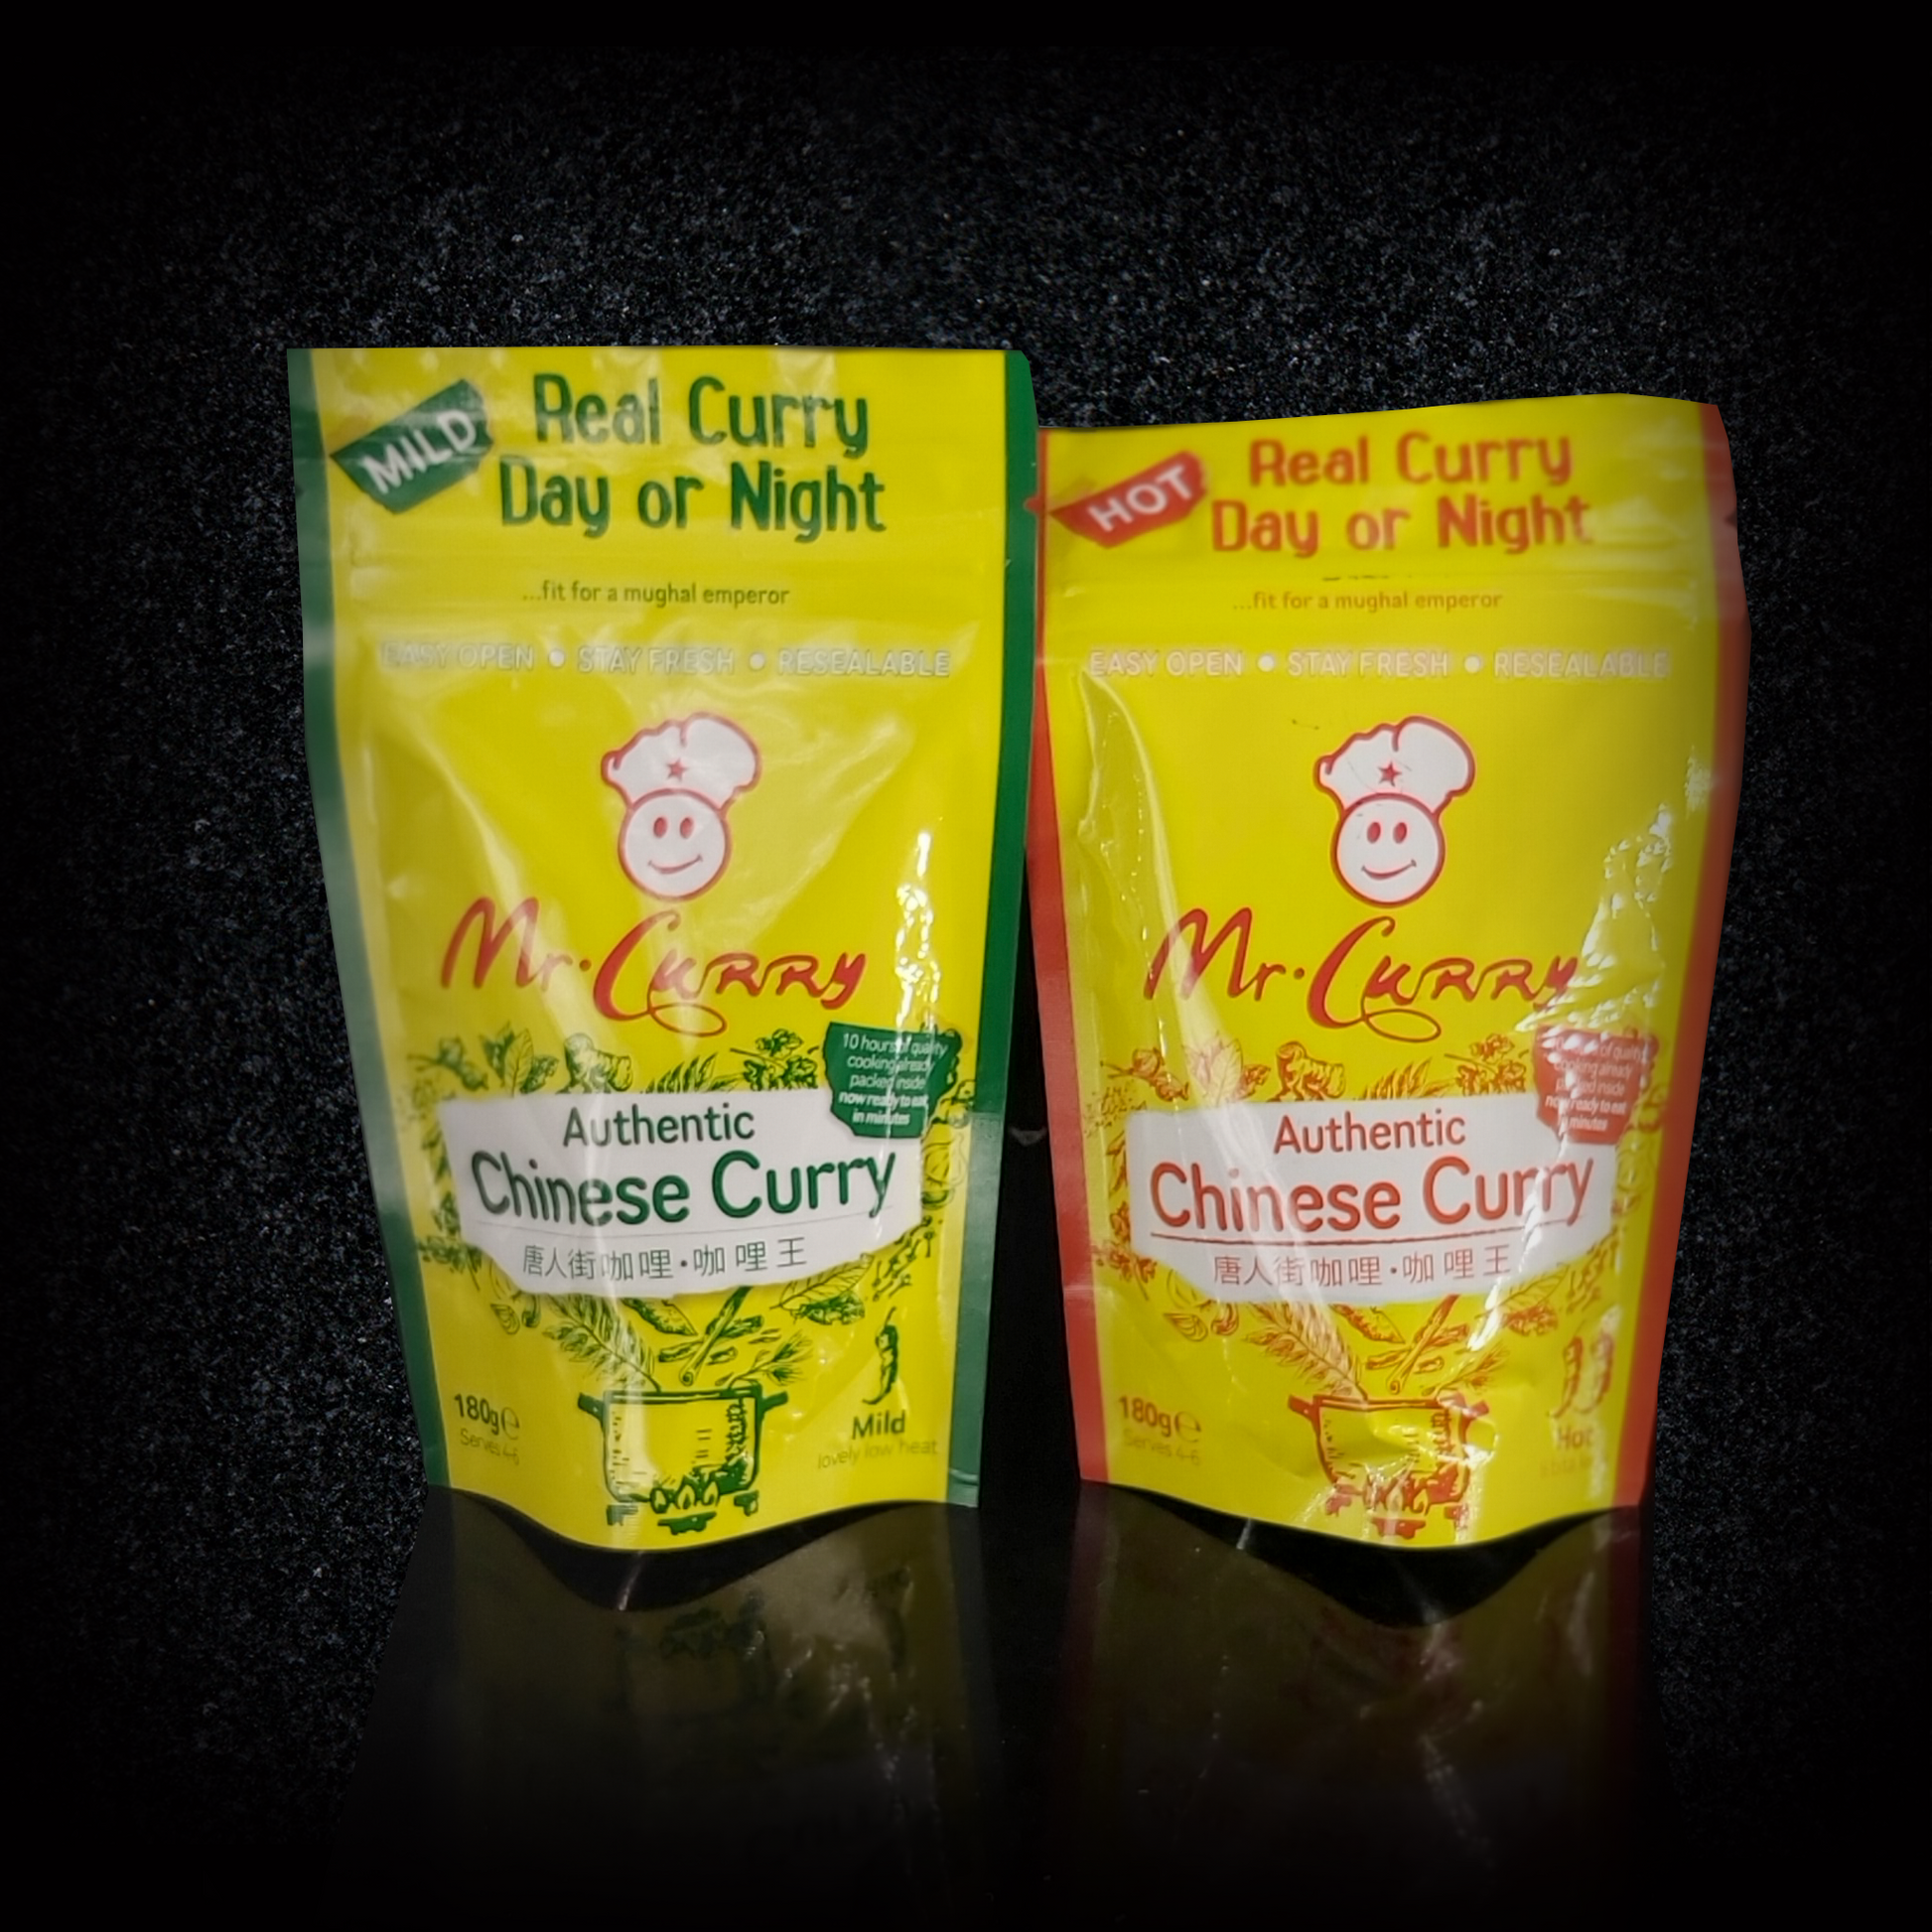 Mr. Curry Sauces and Curries Cribbin Family Butchers